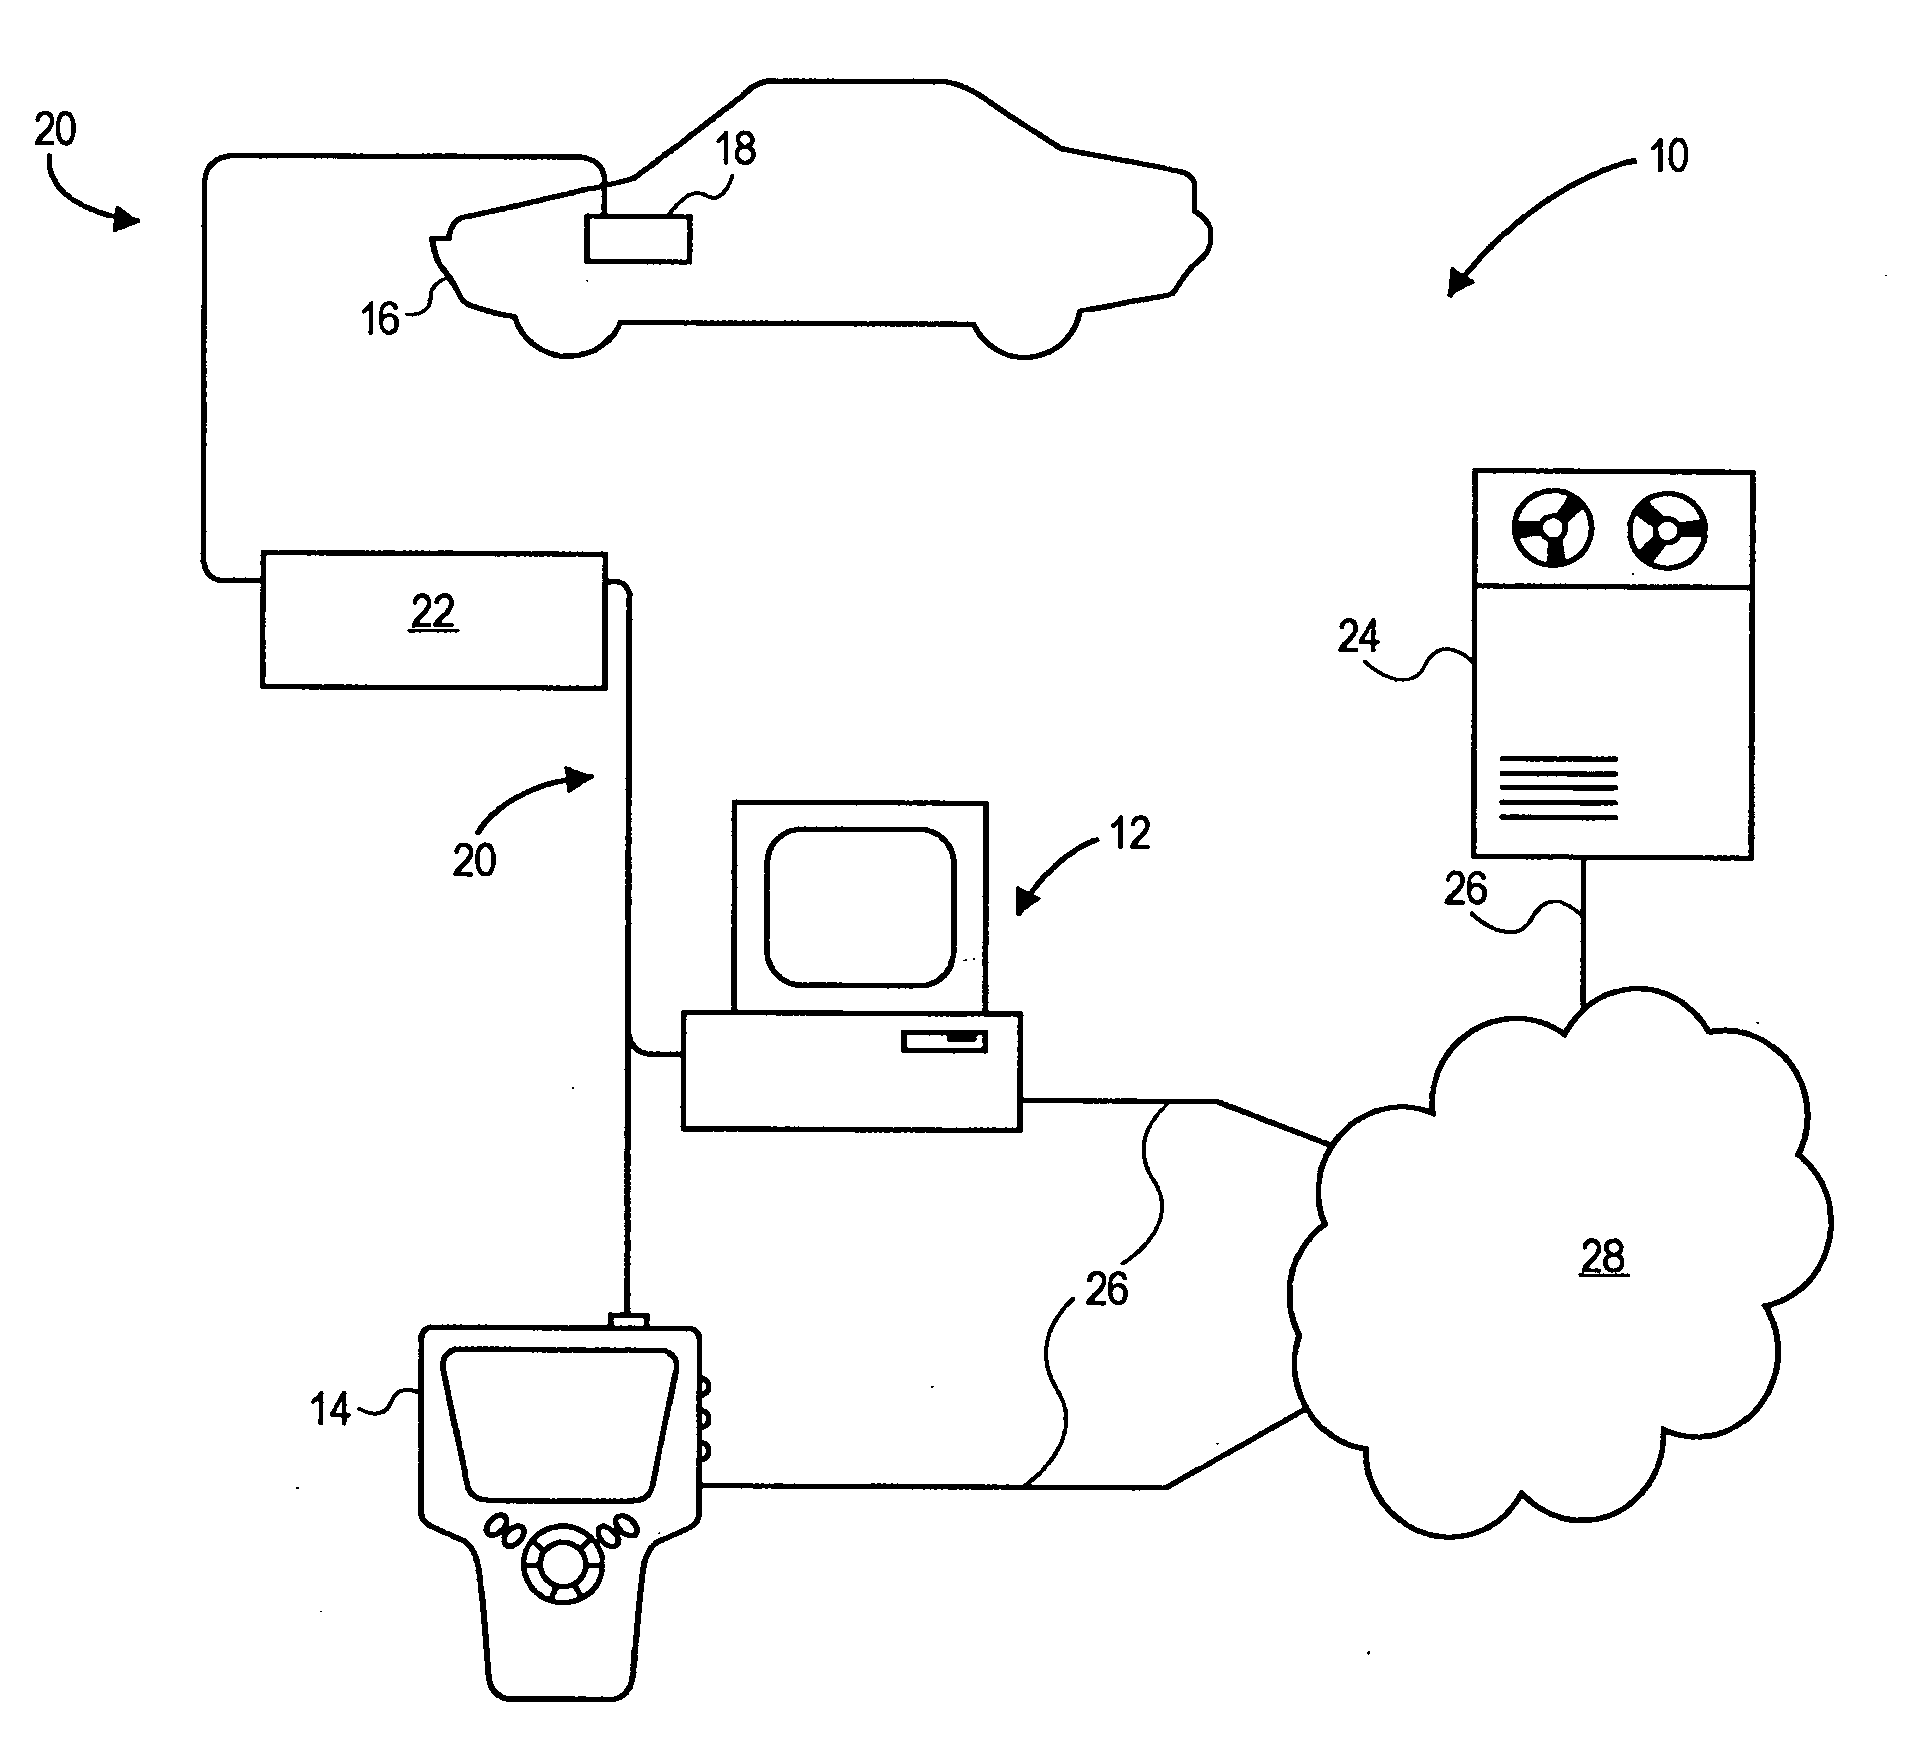 Diagnostics data collection and analysis method and apparatus to diagnose vehicle component failures